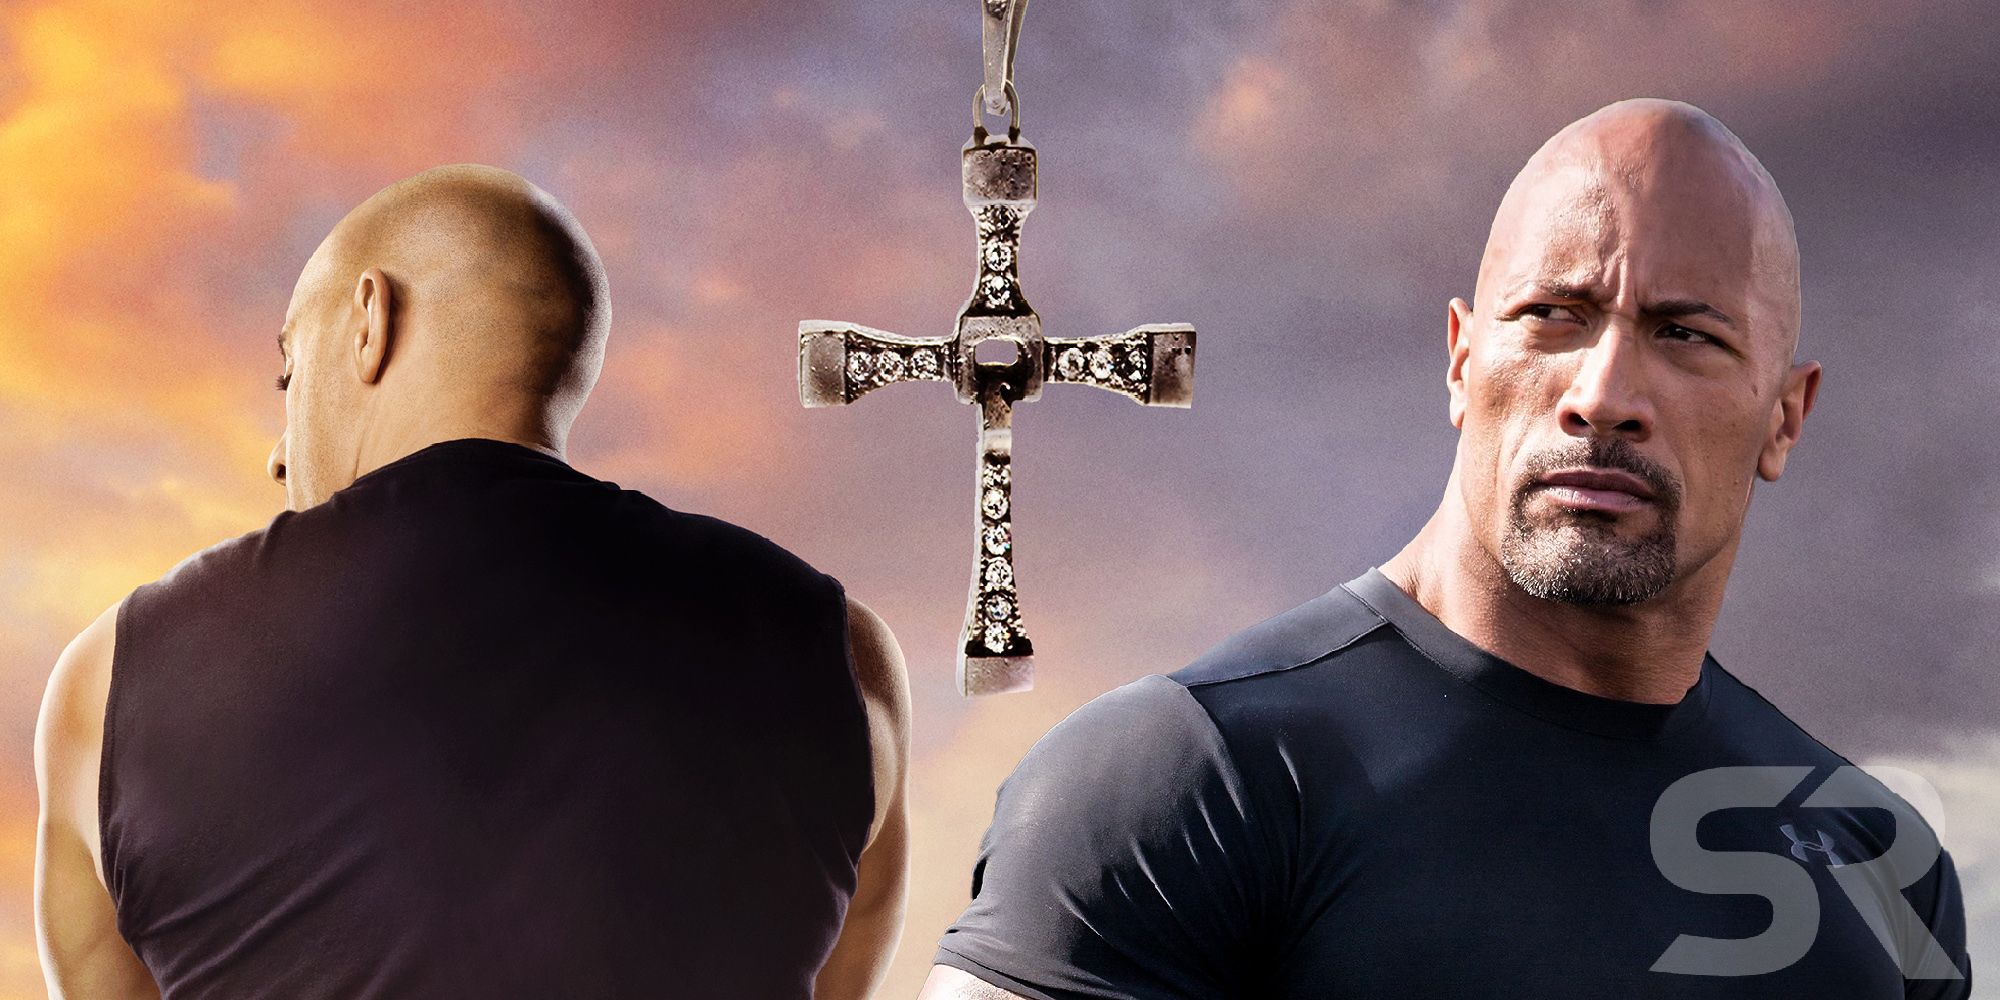 Will The Rock Return For Fast & Furious 10